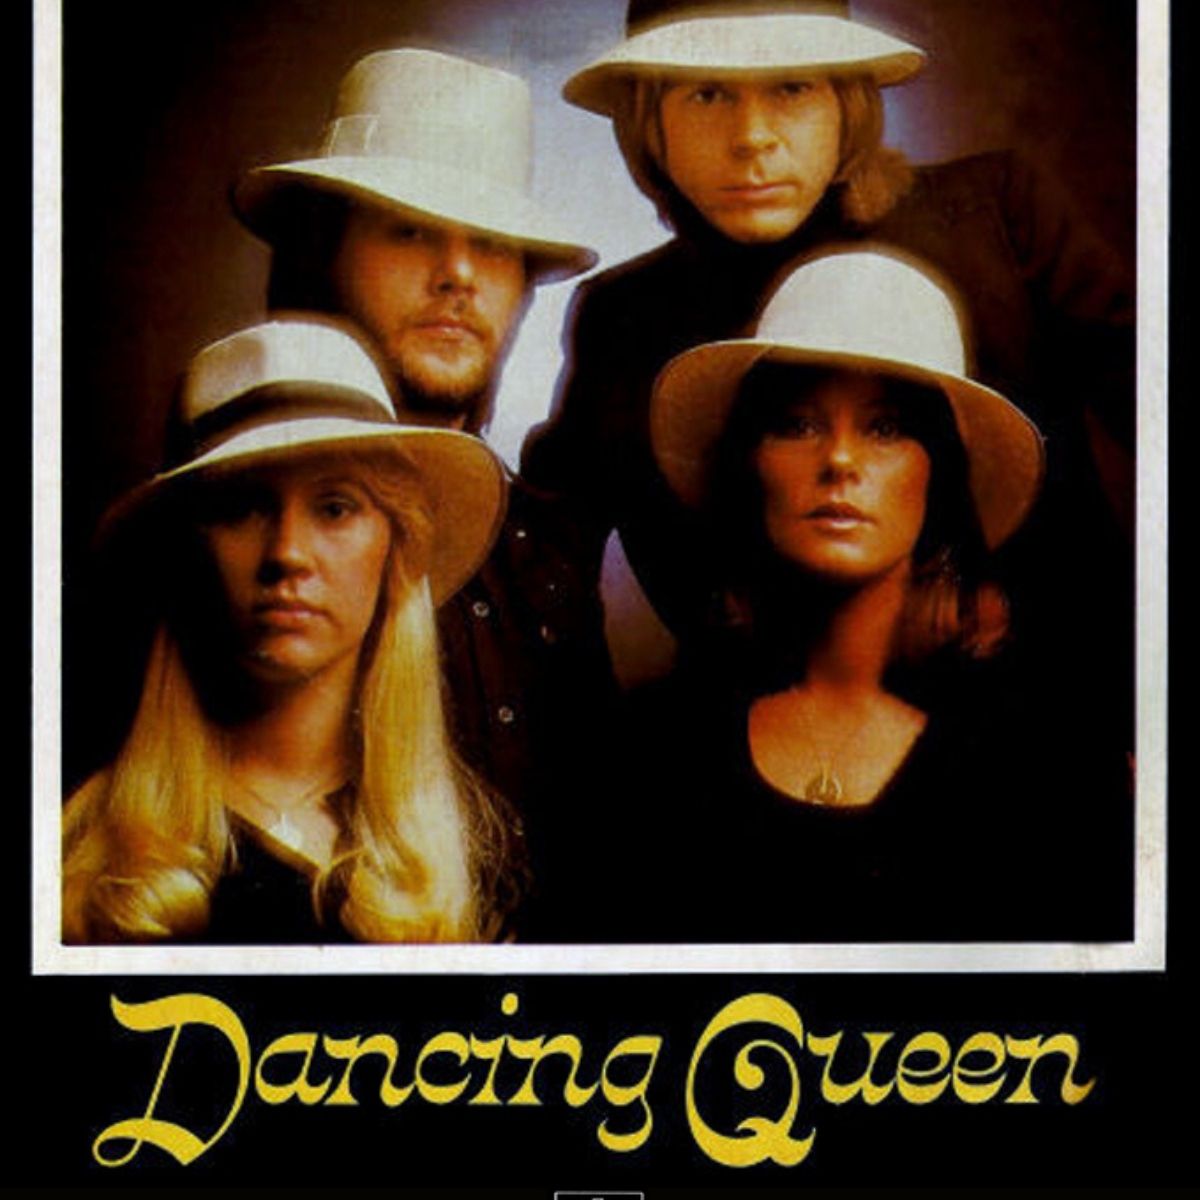 Cover for "Dancing Queen" by ABBA 